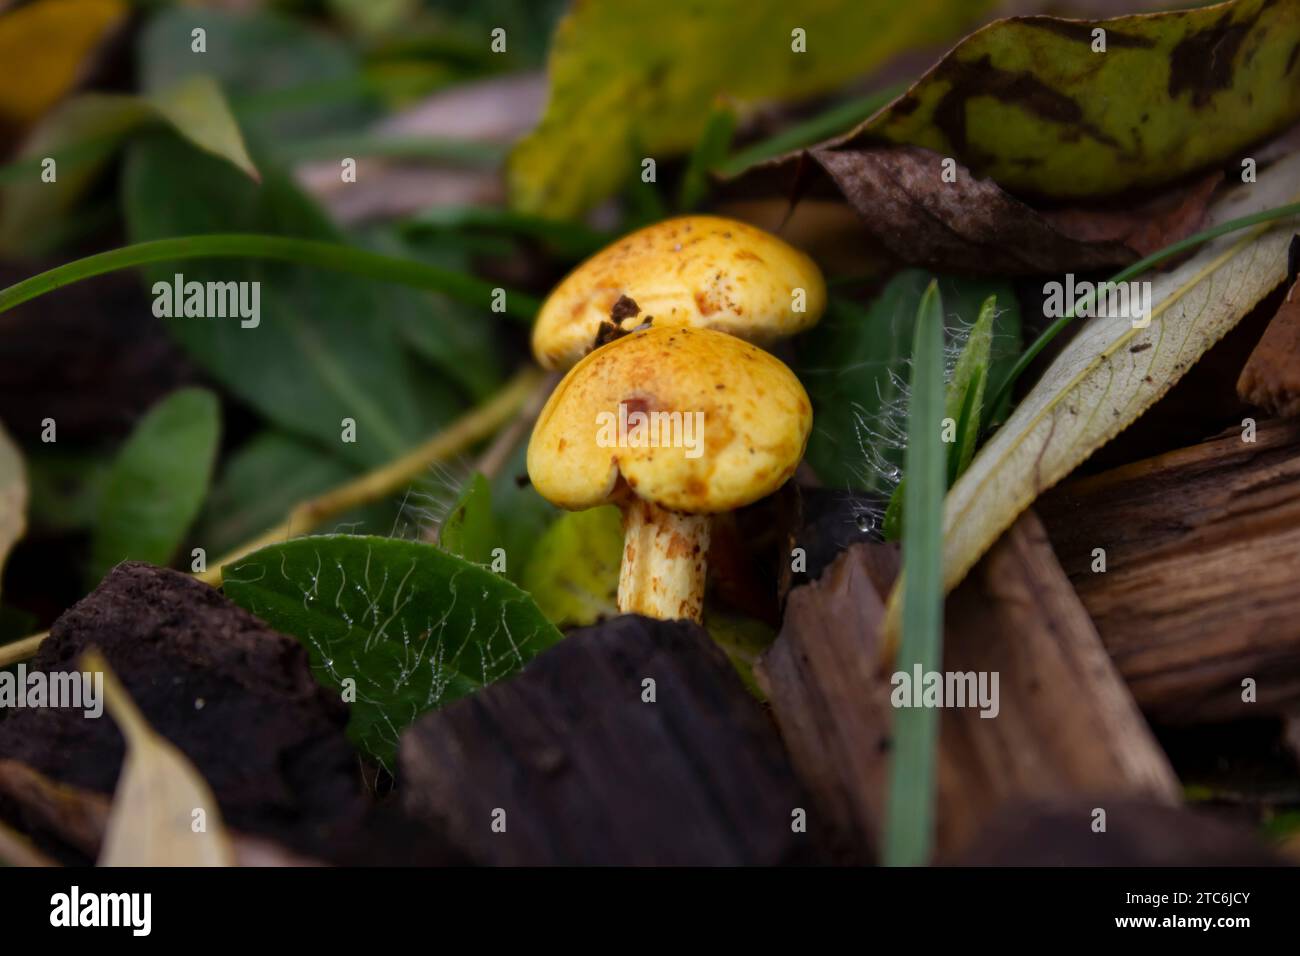 The vibrant yellow mushrooms in a lush forest of green foliage Stock Photo